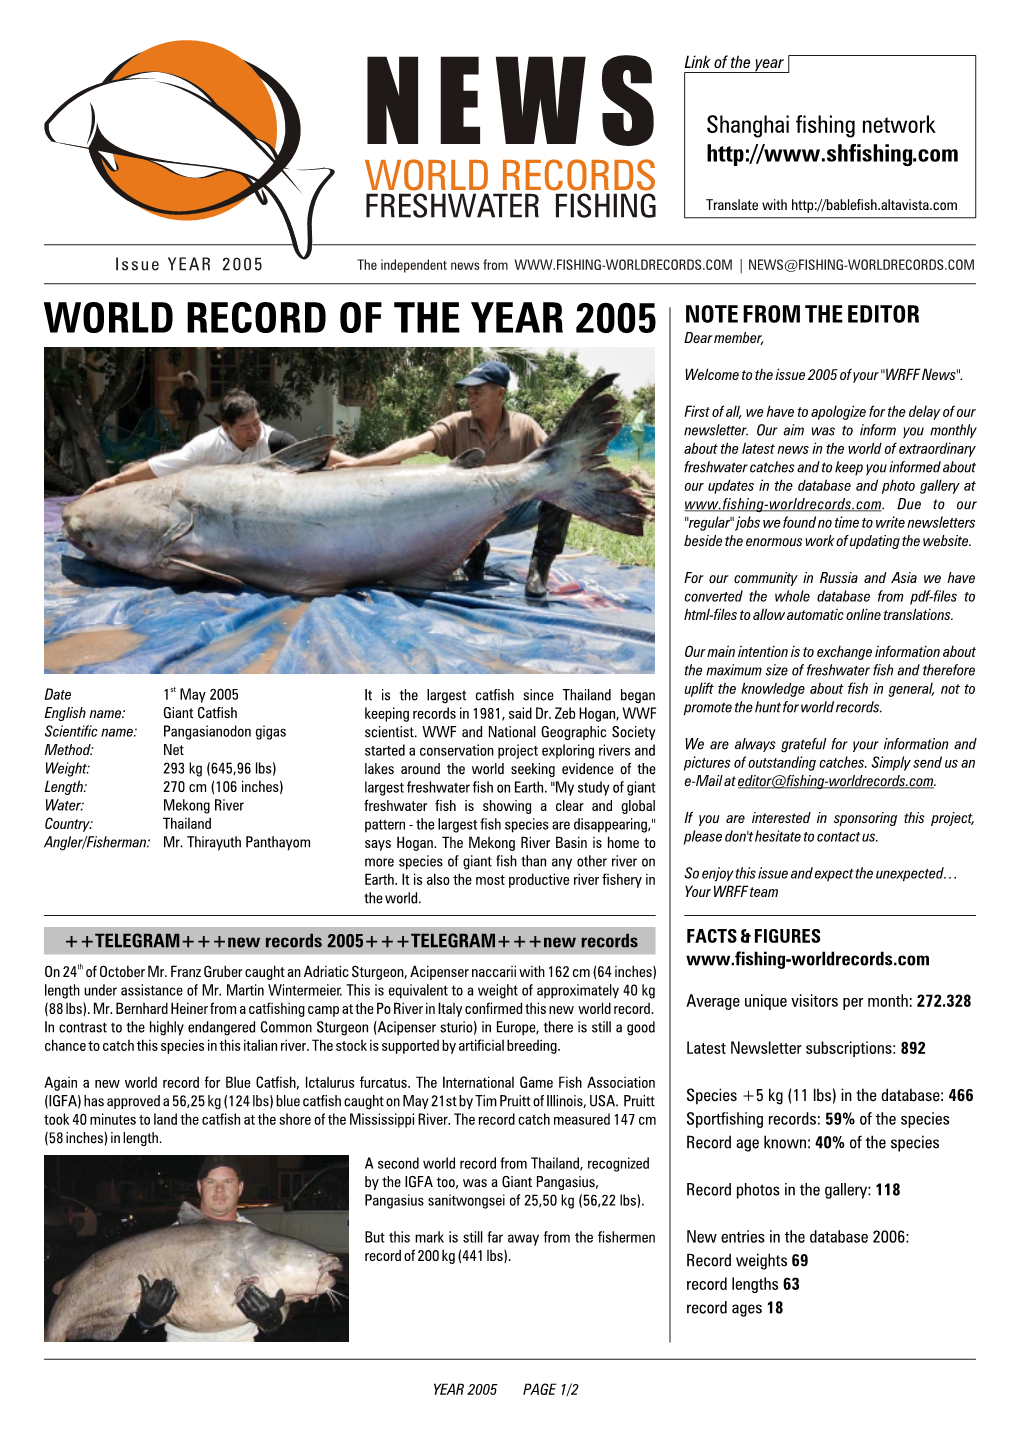 World Records World Record of the Year 2005